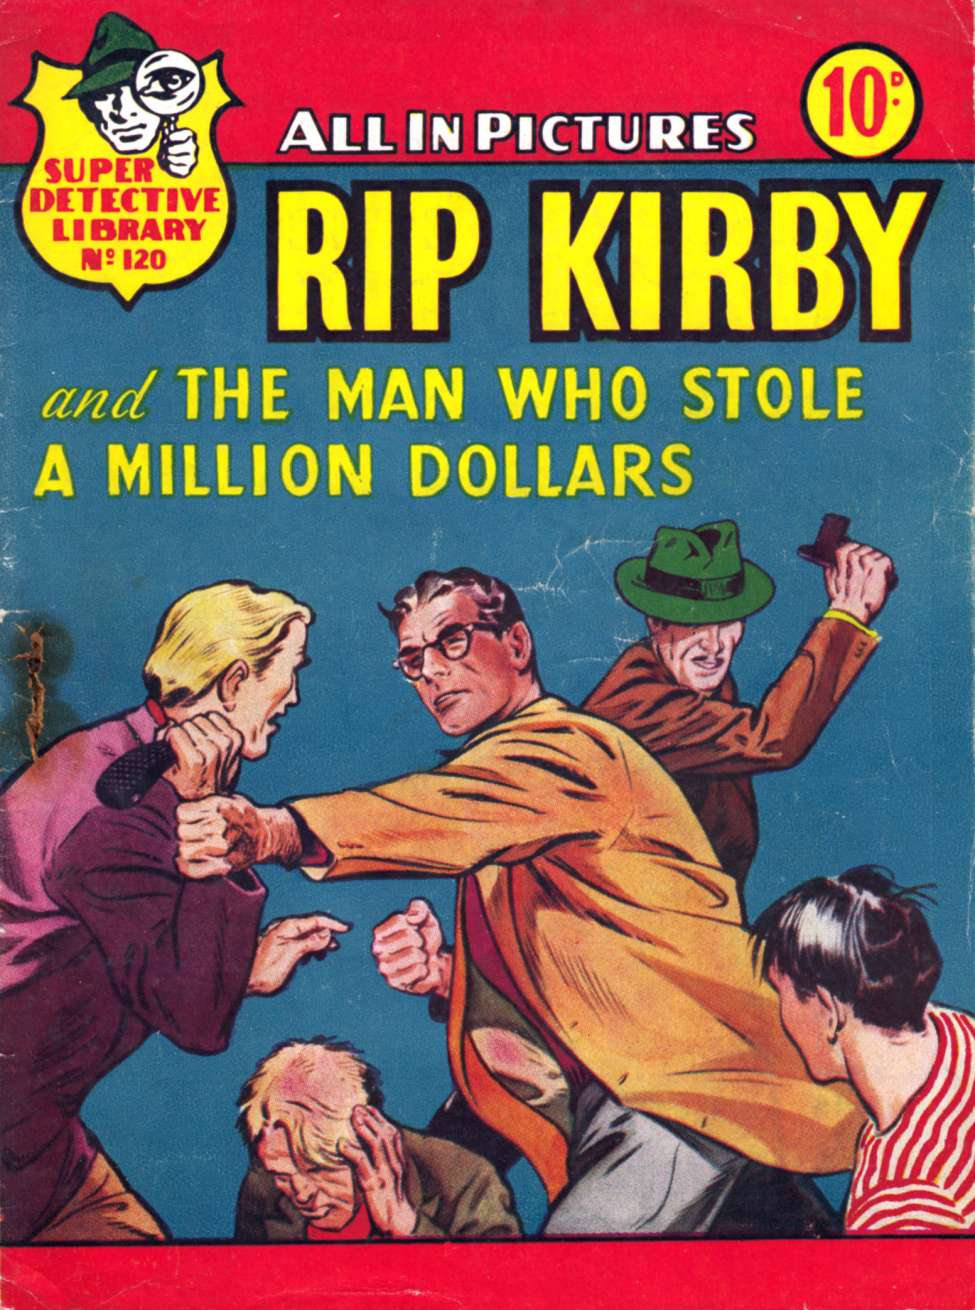 Book Cover For Super Detective Library 120 - Rip Kirby-The Man Who Stole a Million Dollars